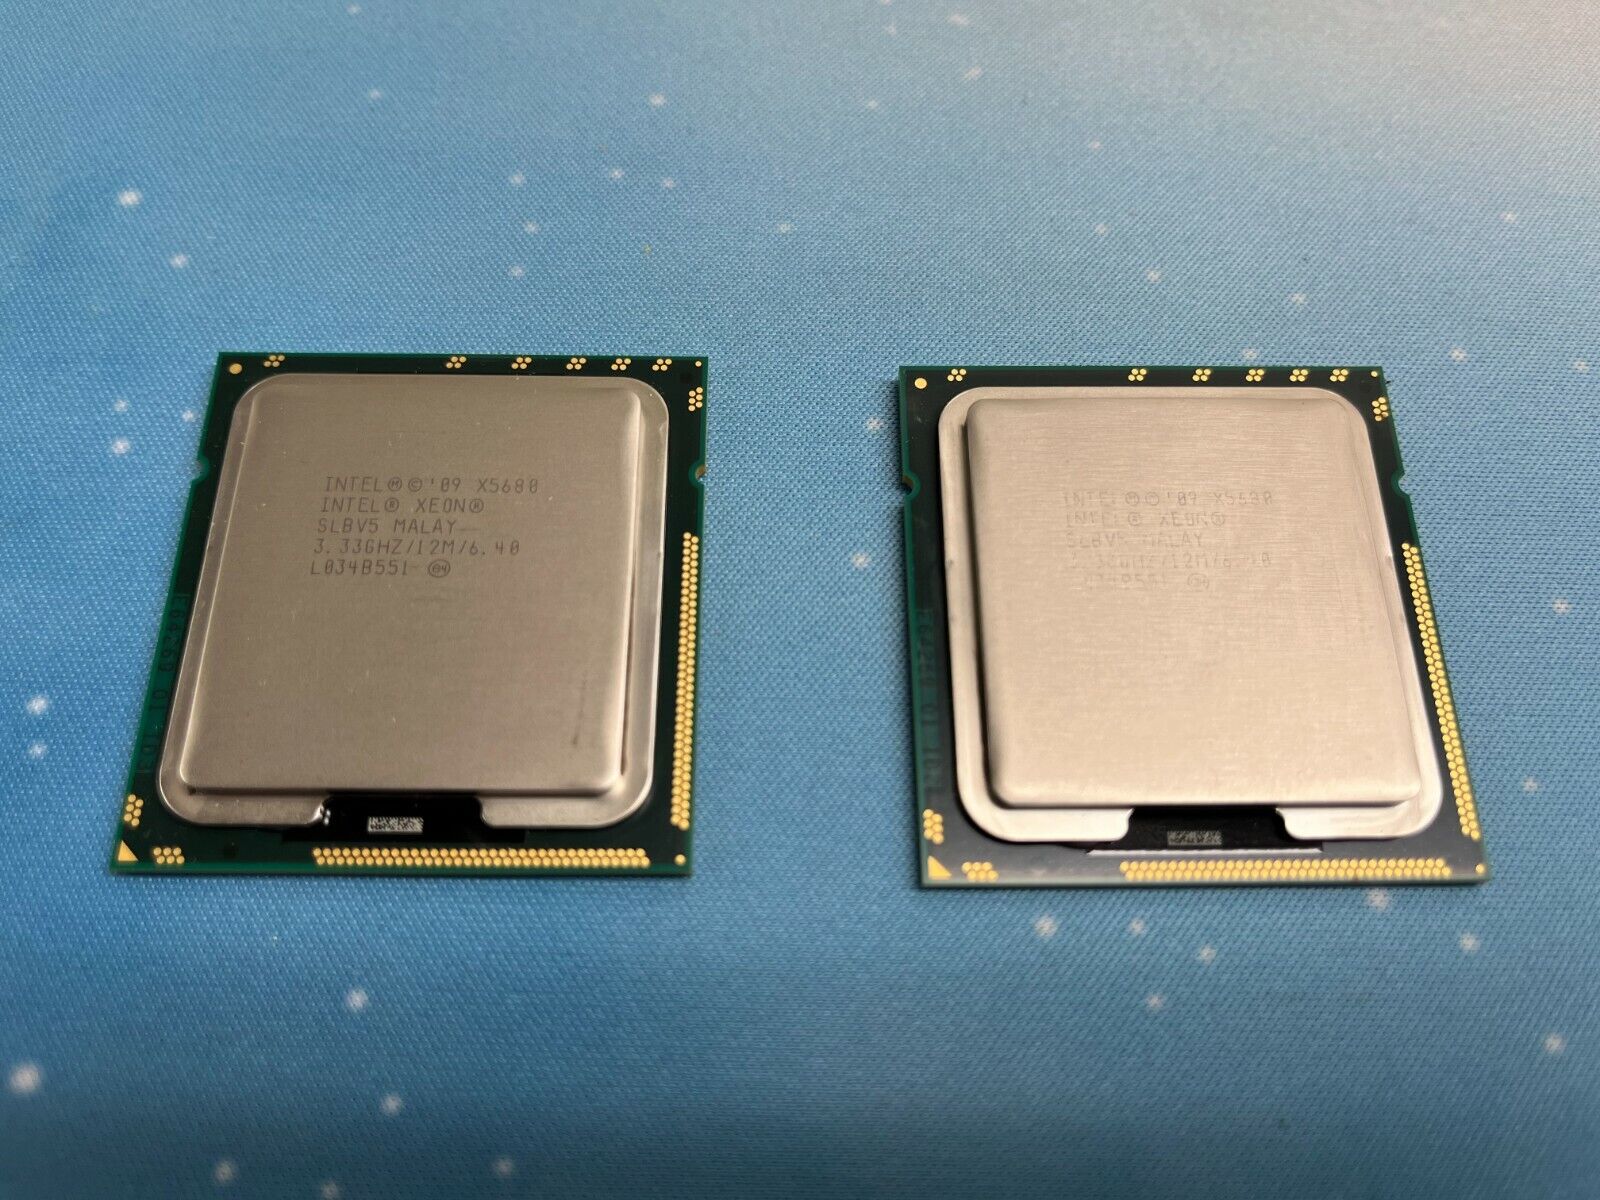 Intel Xeon X5680 Six-Core 3.33GHz - Matched Pair, pulled from working system